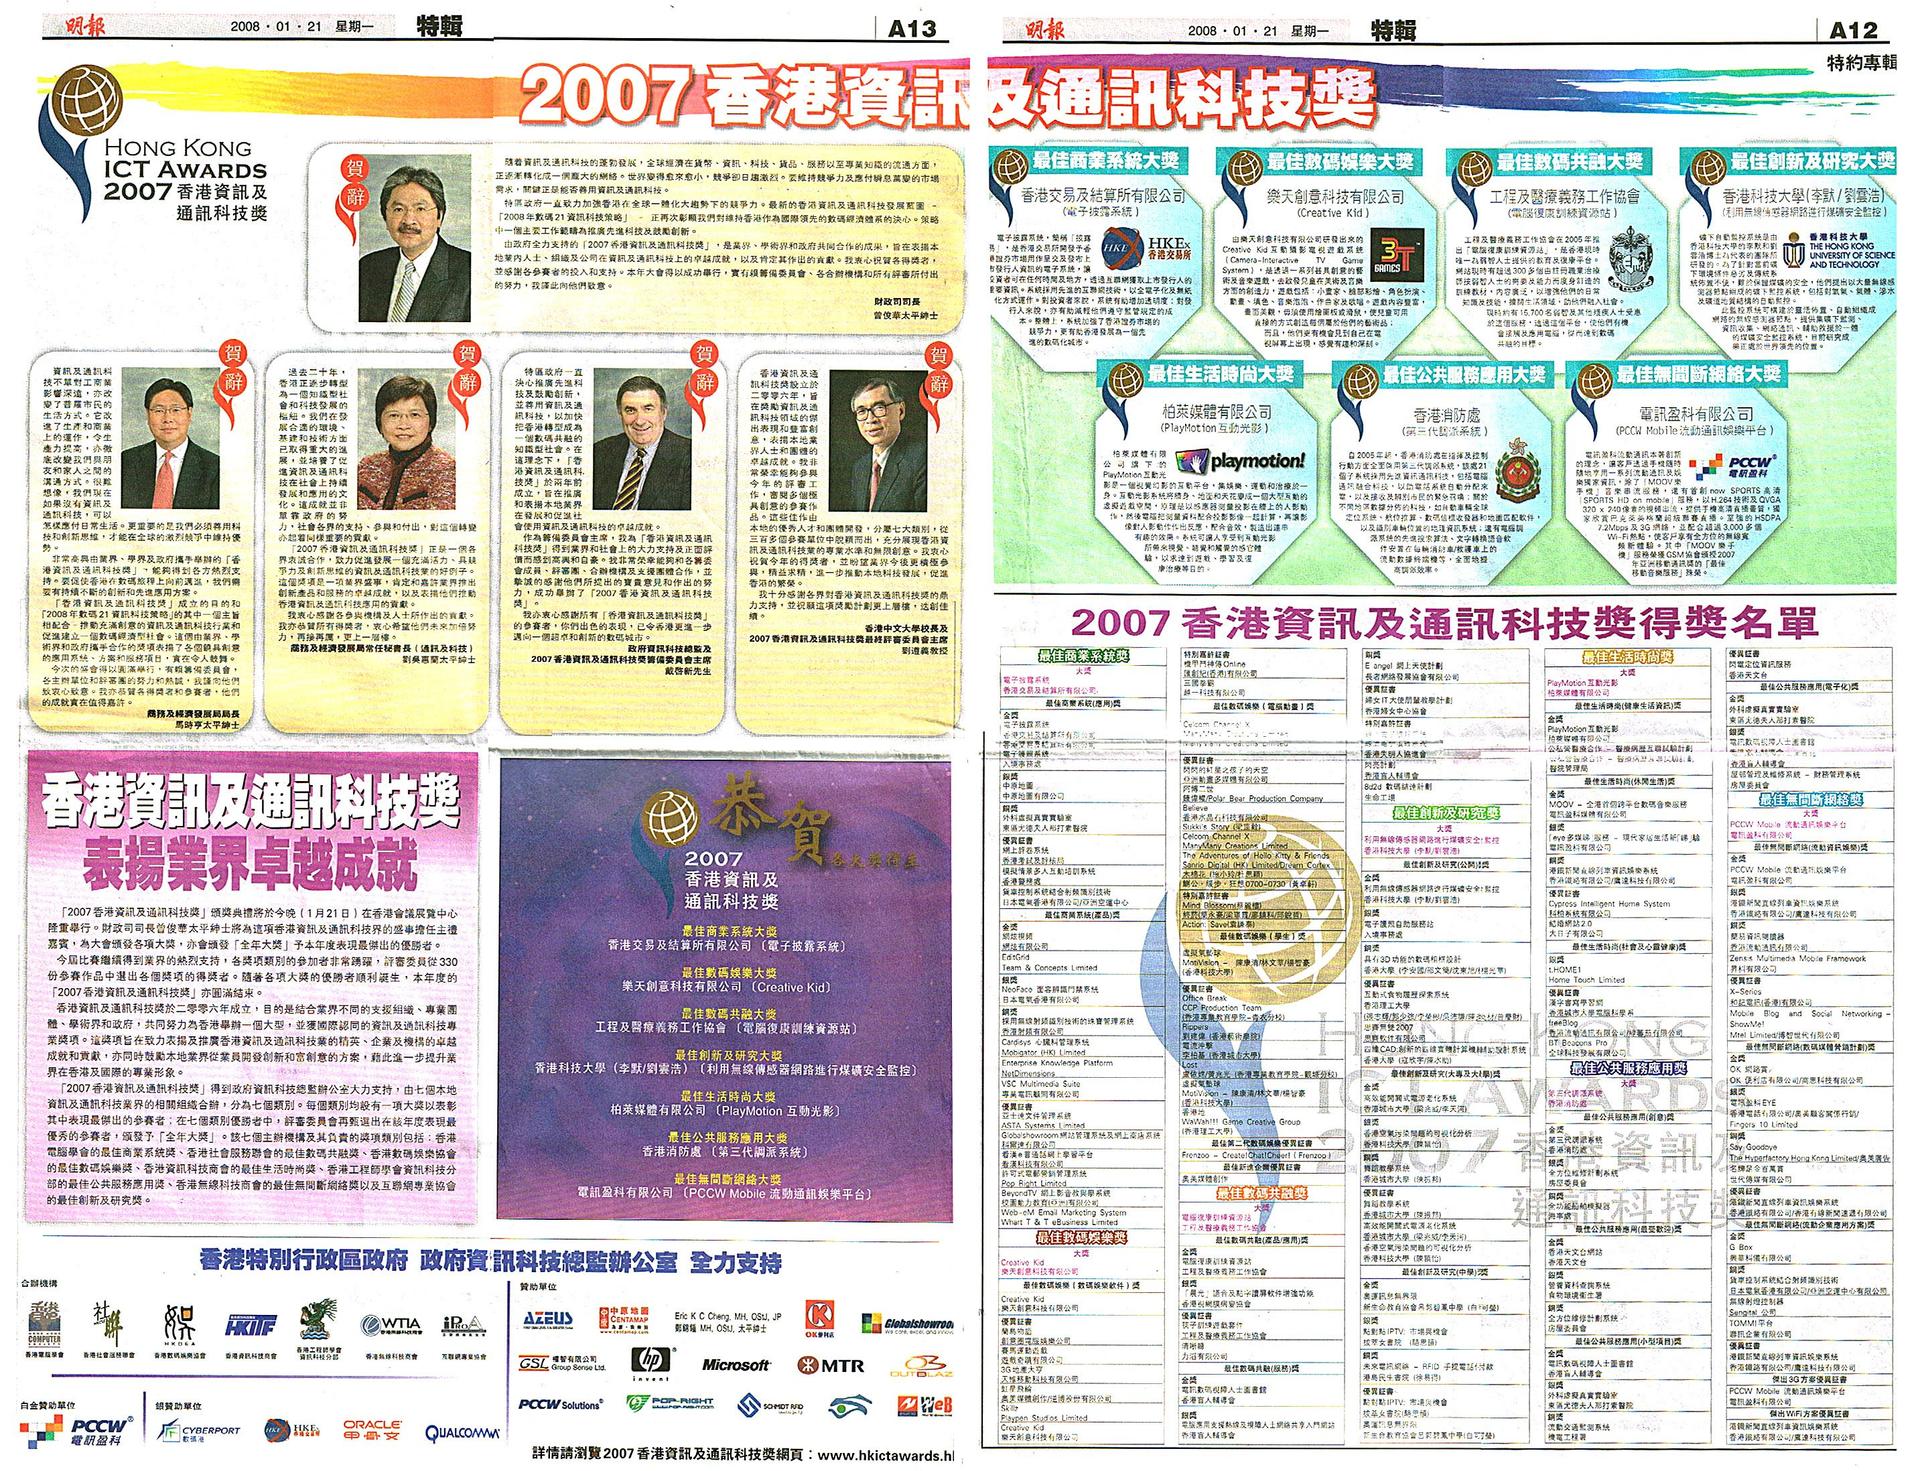 Post event coverage - Ming Pao